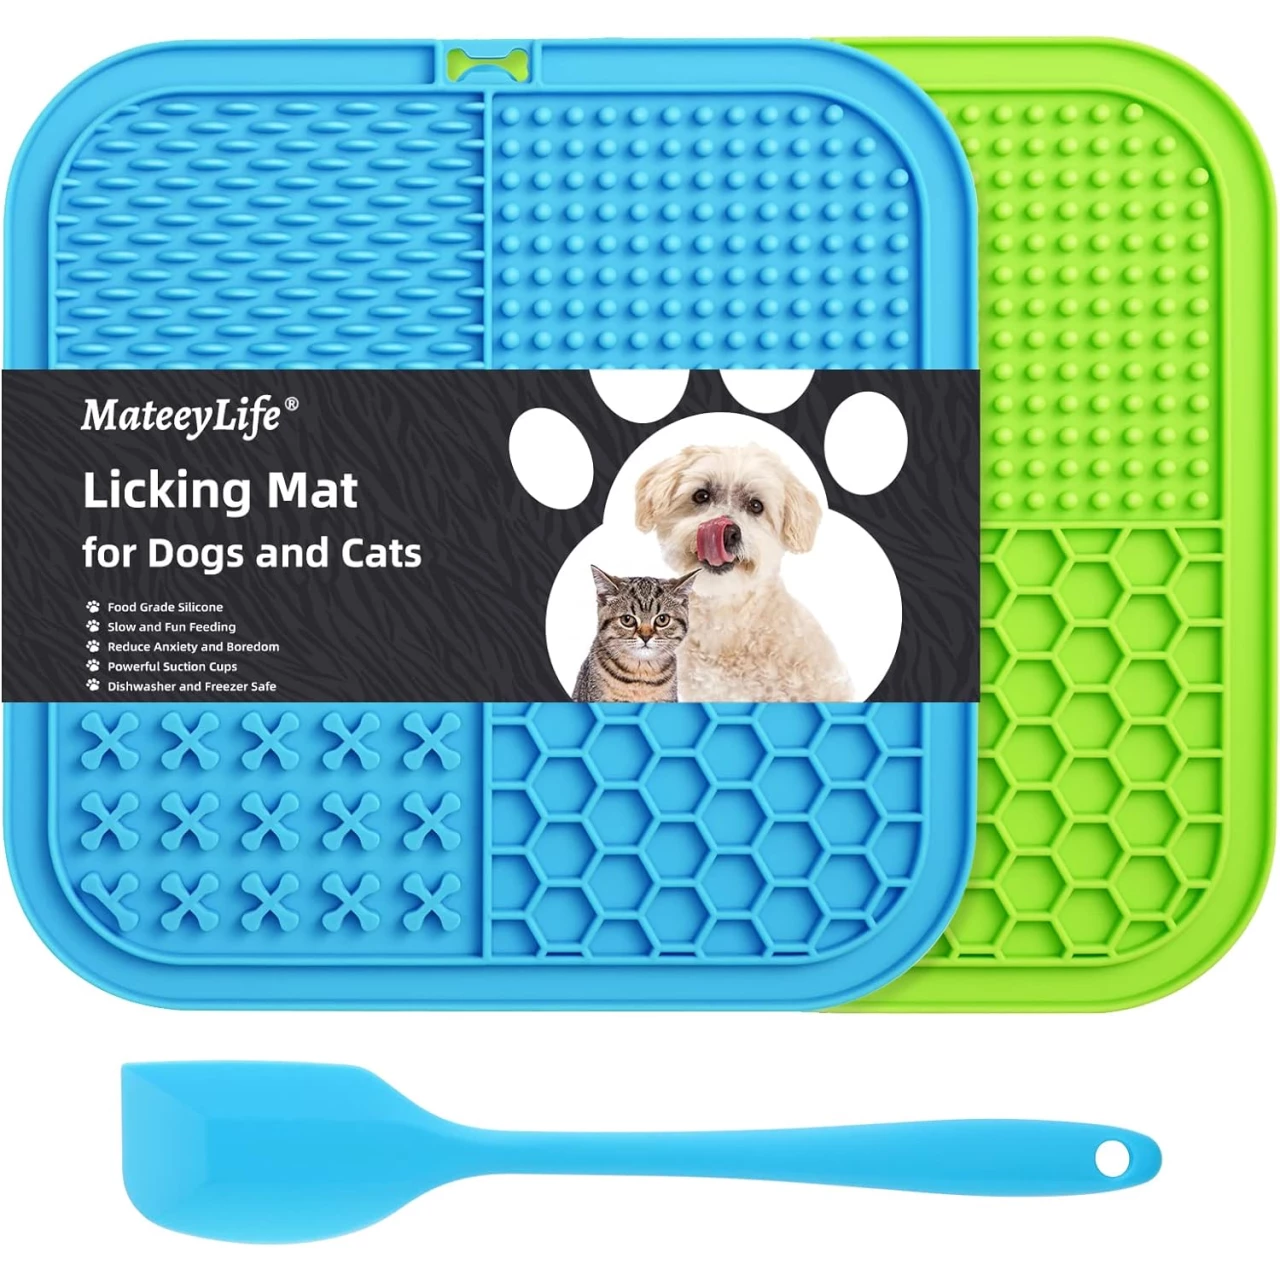 MateeyLife Licking Mat for Dogs and Cats, Premium Lick Mats with Suction Cups